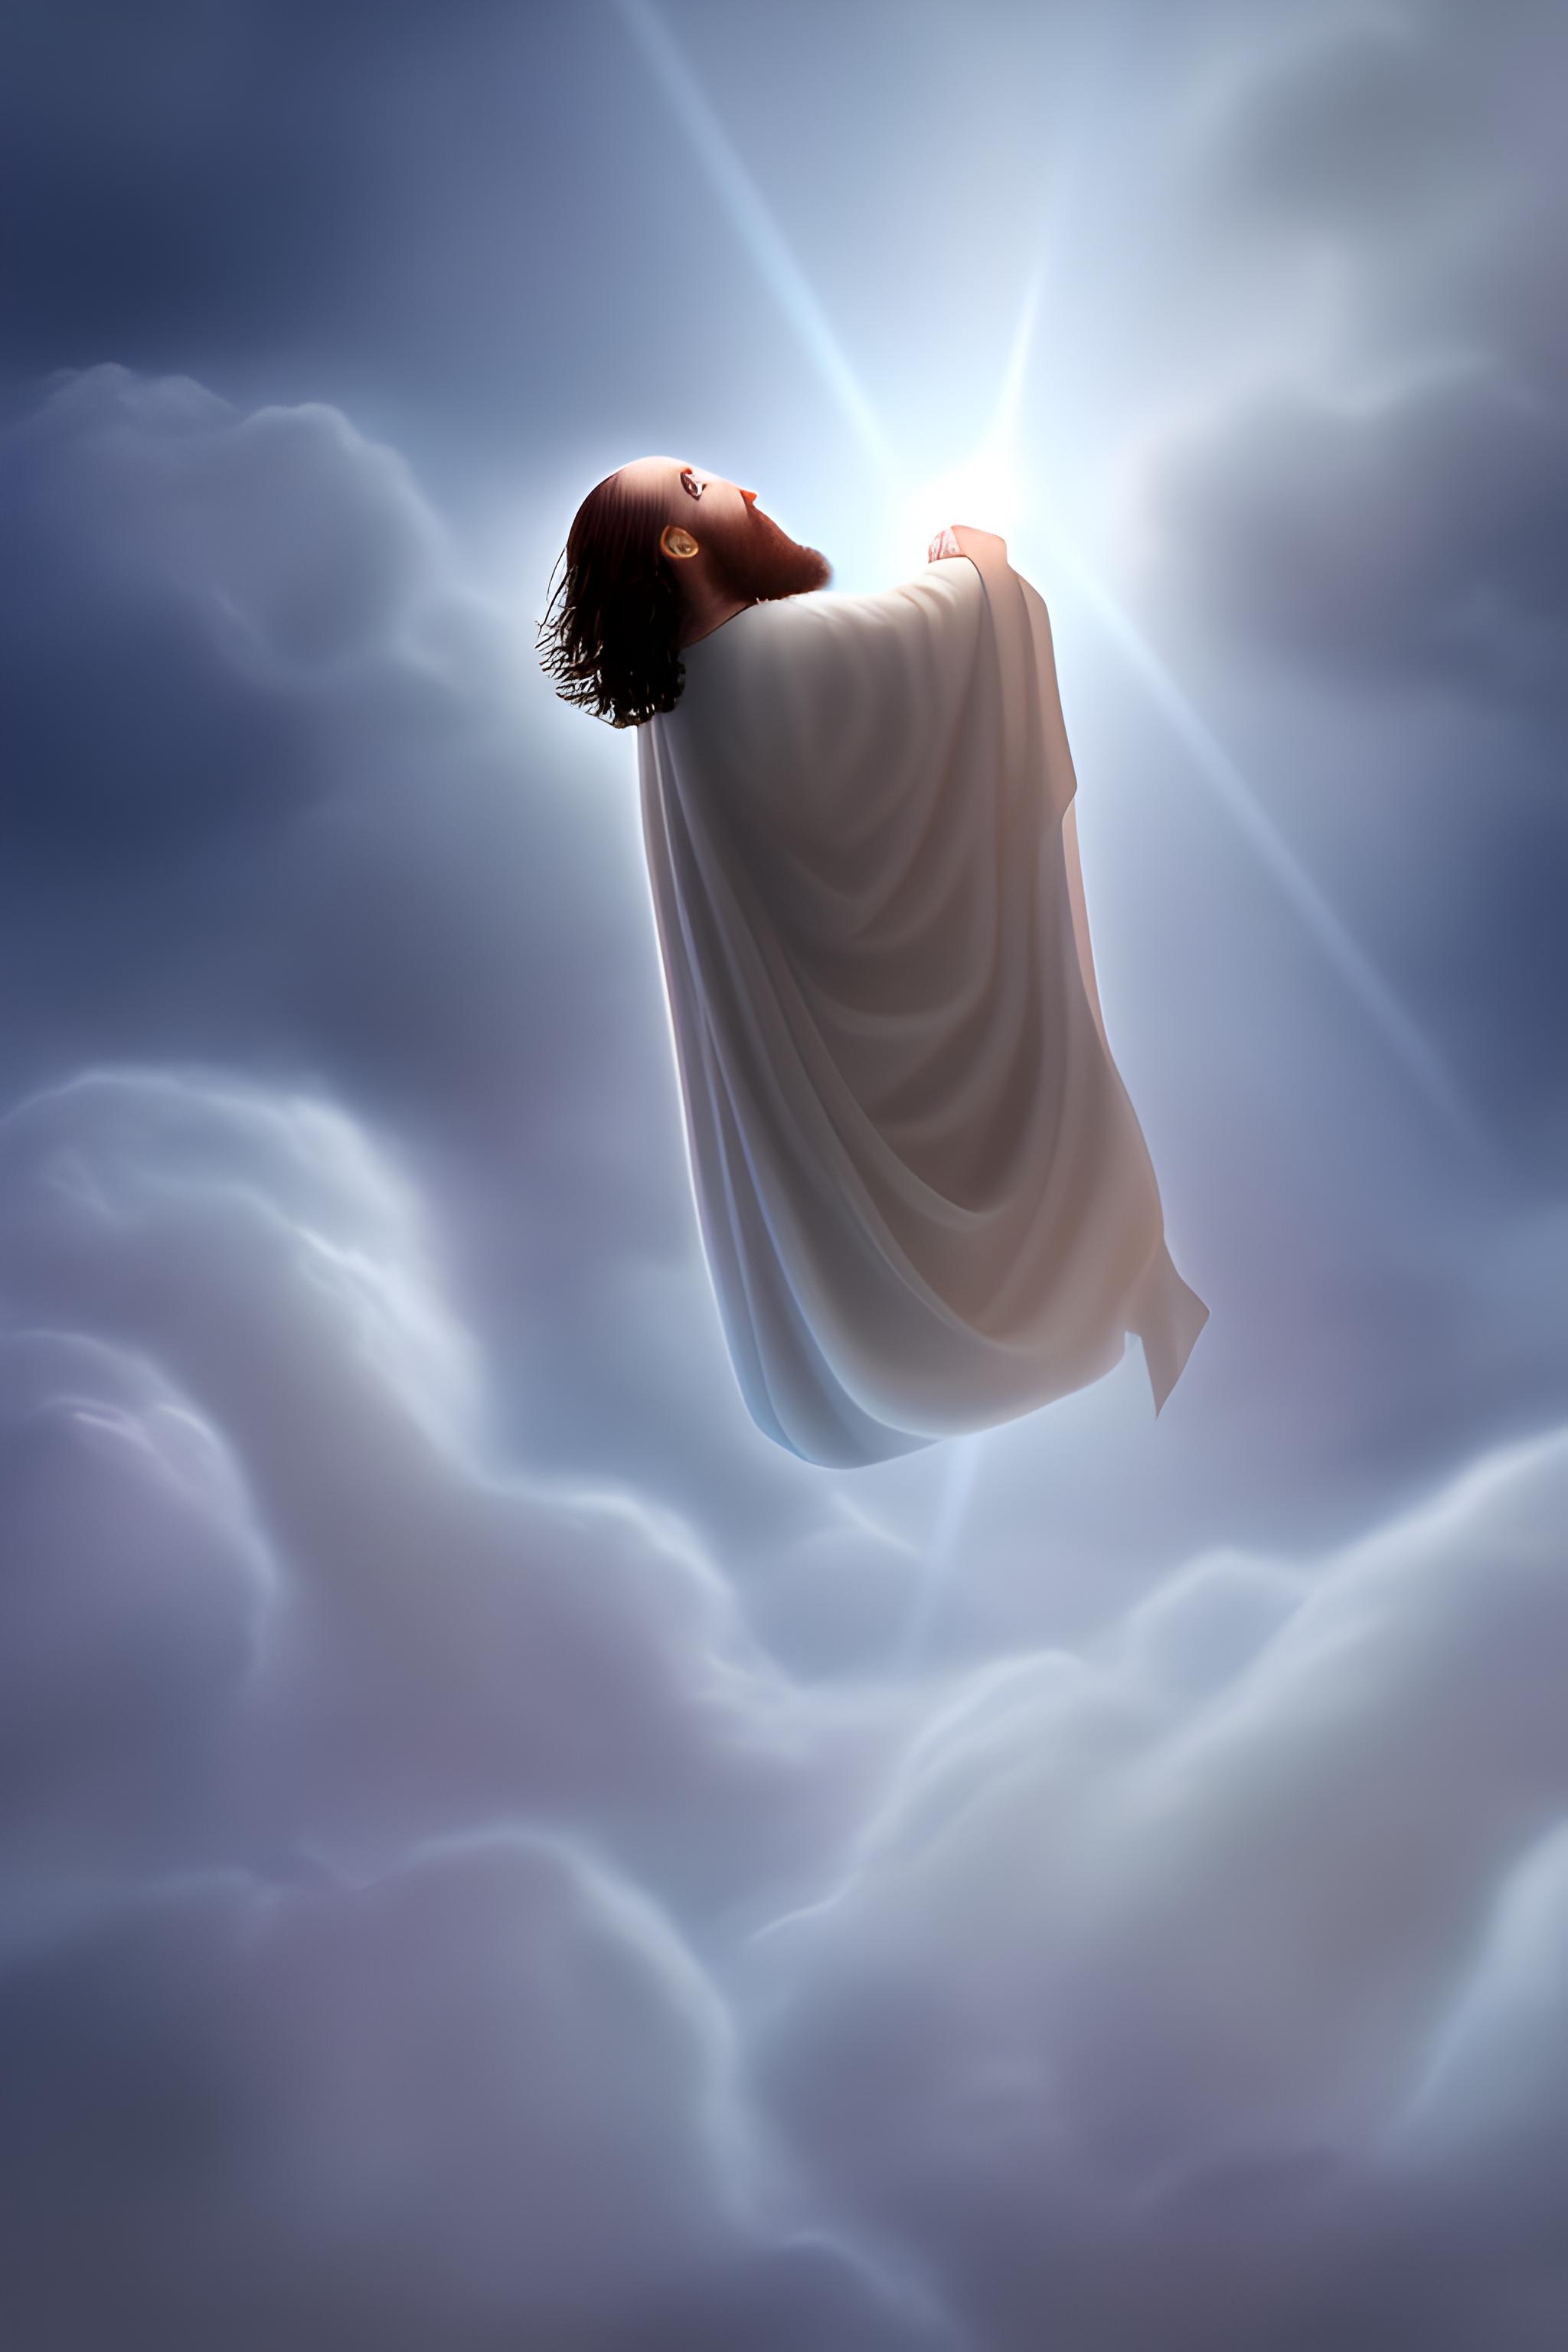 Jesus Christ reaching down from heaven surrounded by angels and clouds ...